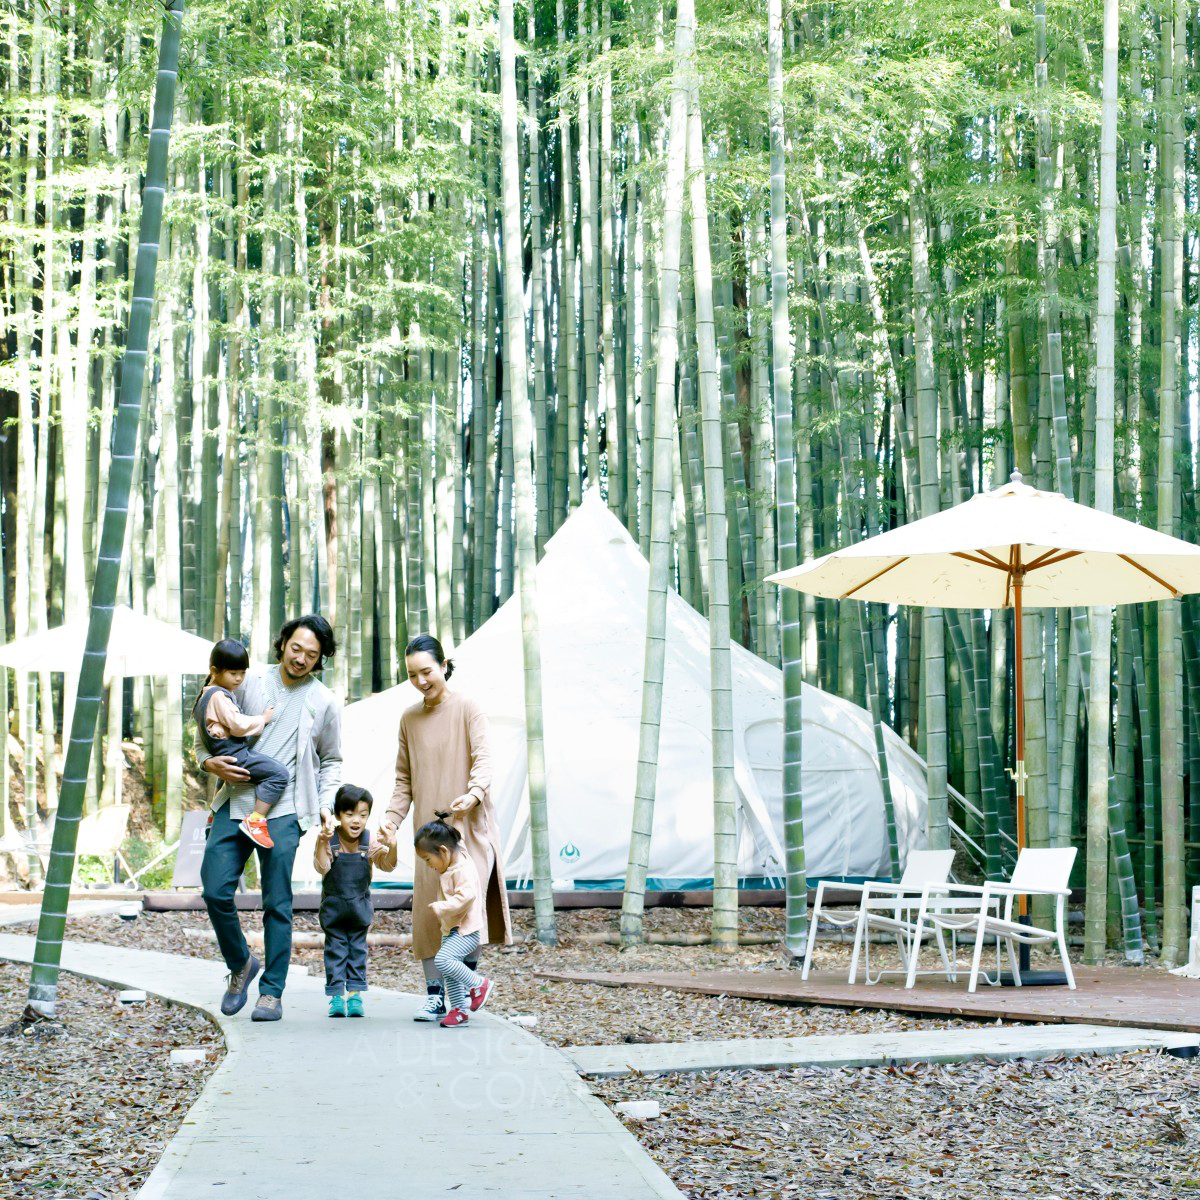 The Bamboo Forest Simple Lodging by Naoyuki Aoki